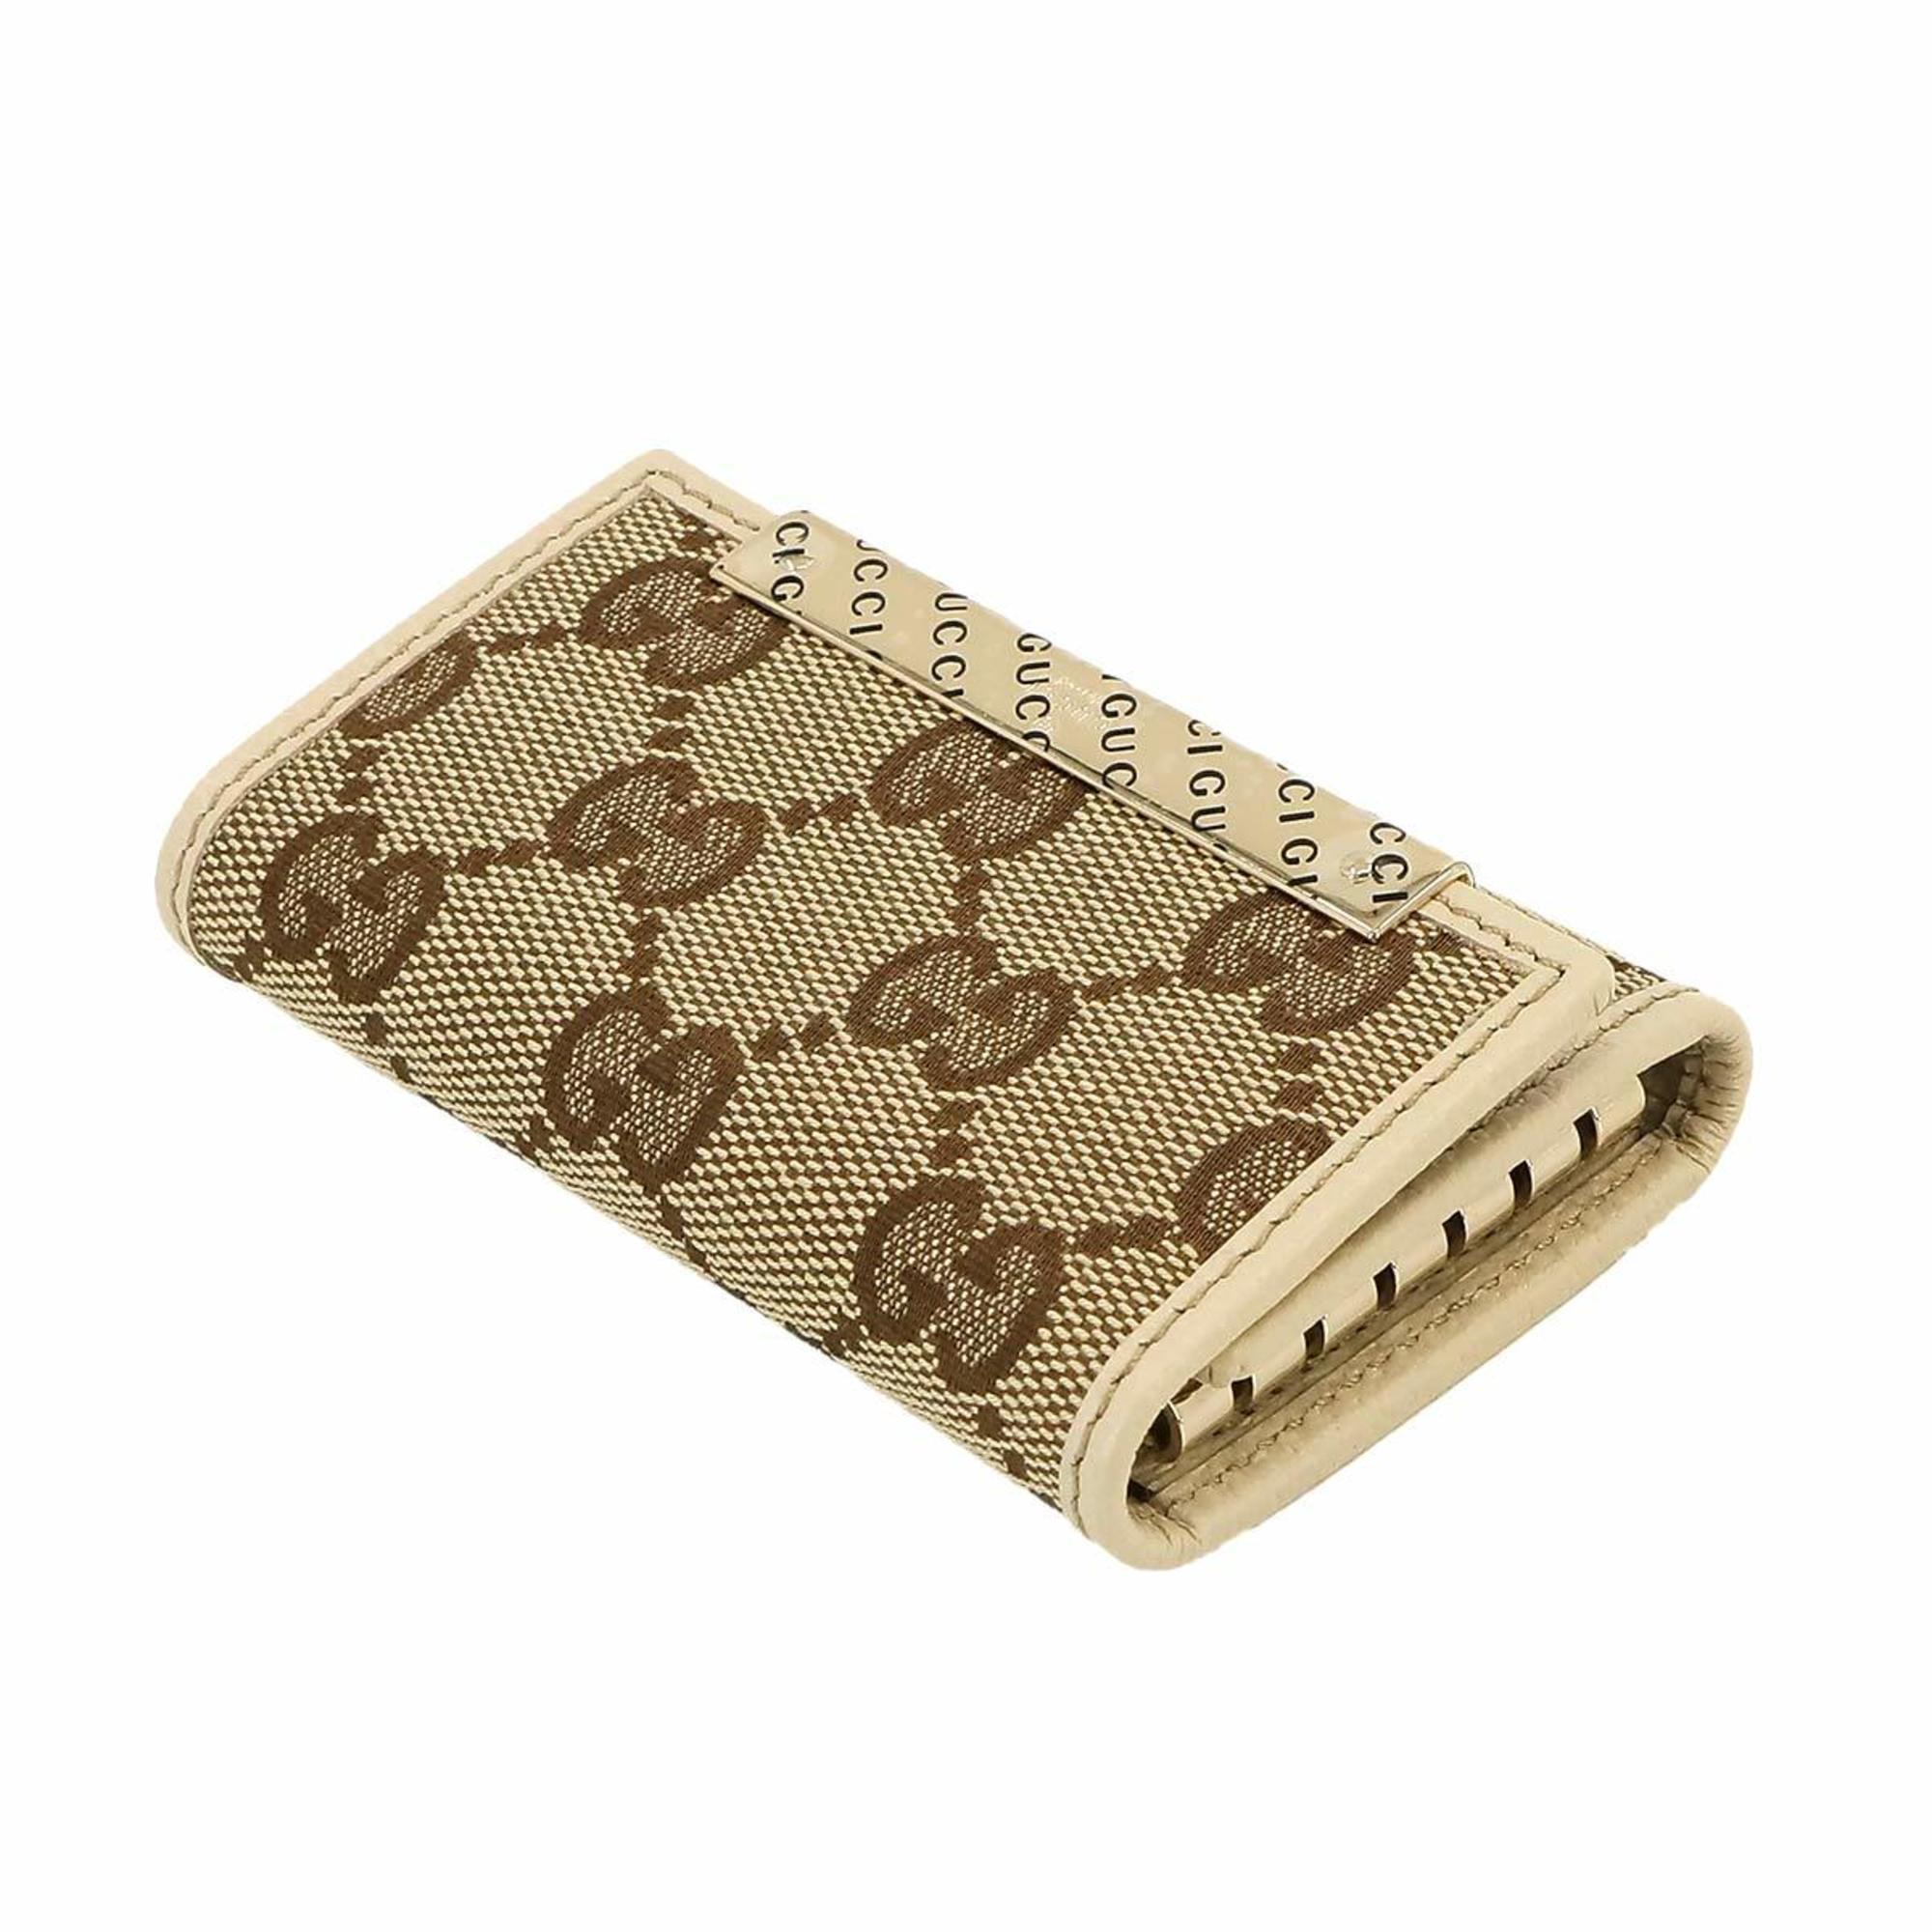 GUCCI GG Canvas 6-ring Key Case Leather Beige Brown 127048 Gold Metal Fittings